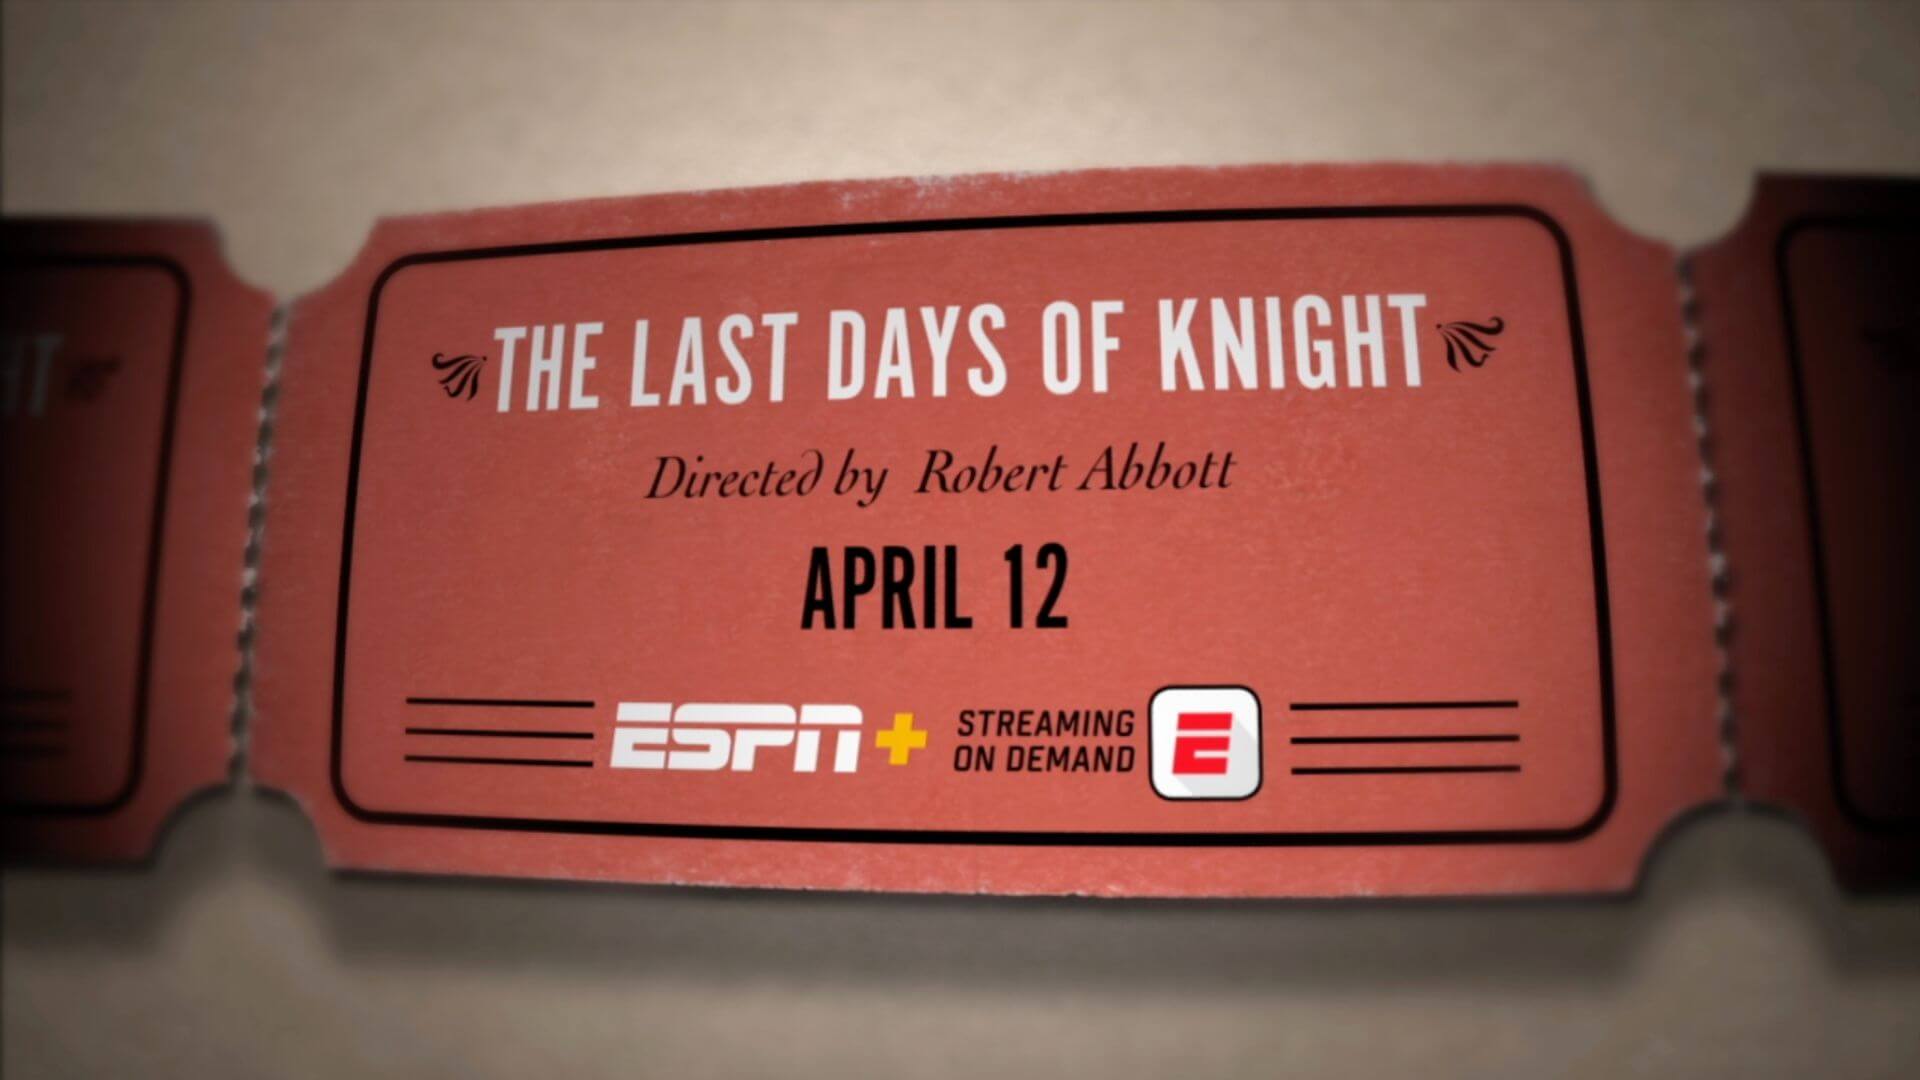 The-Last-Days-Of-Knight-espn-plus-shows